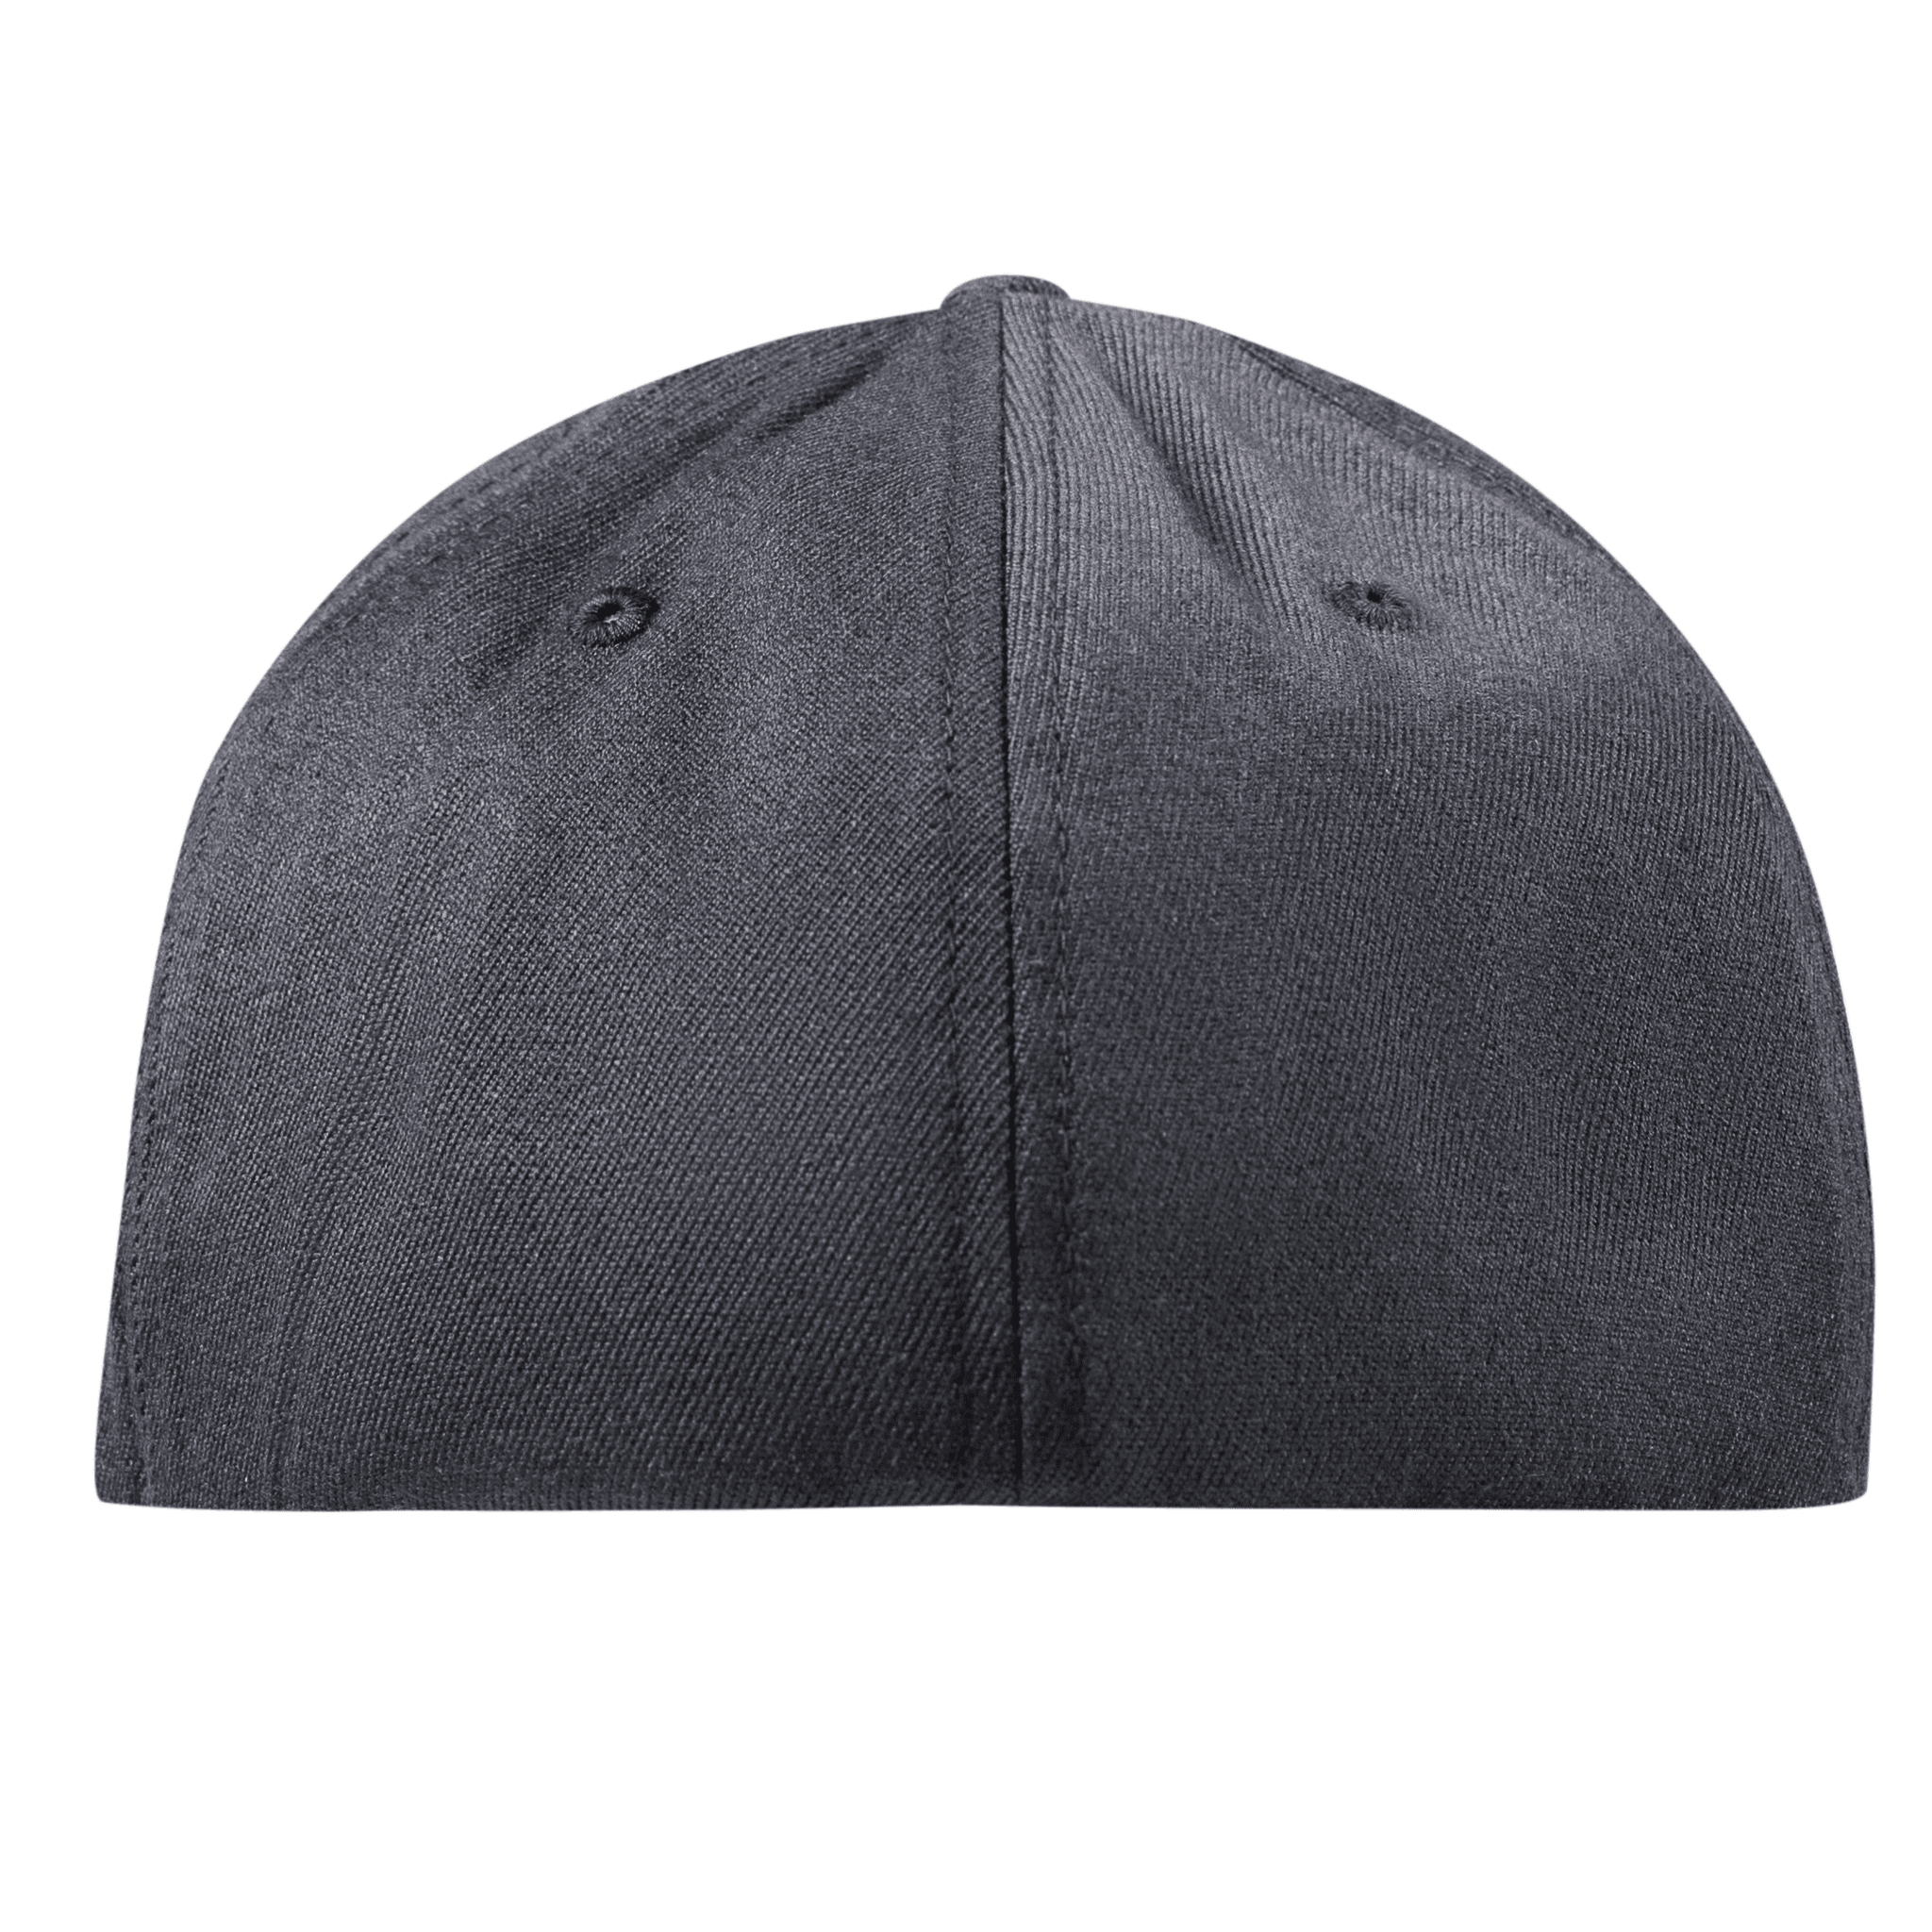 New Jersey Vintage Flexfit Fitted Back Charcoal